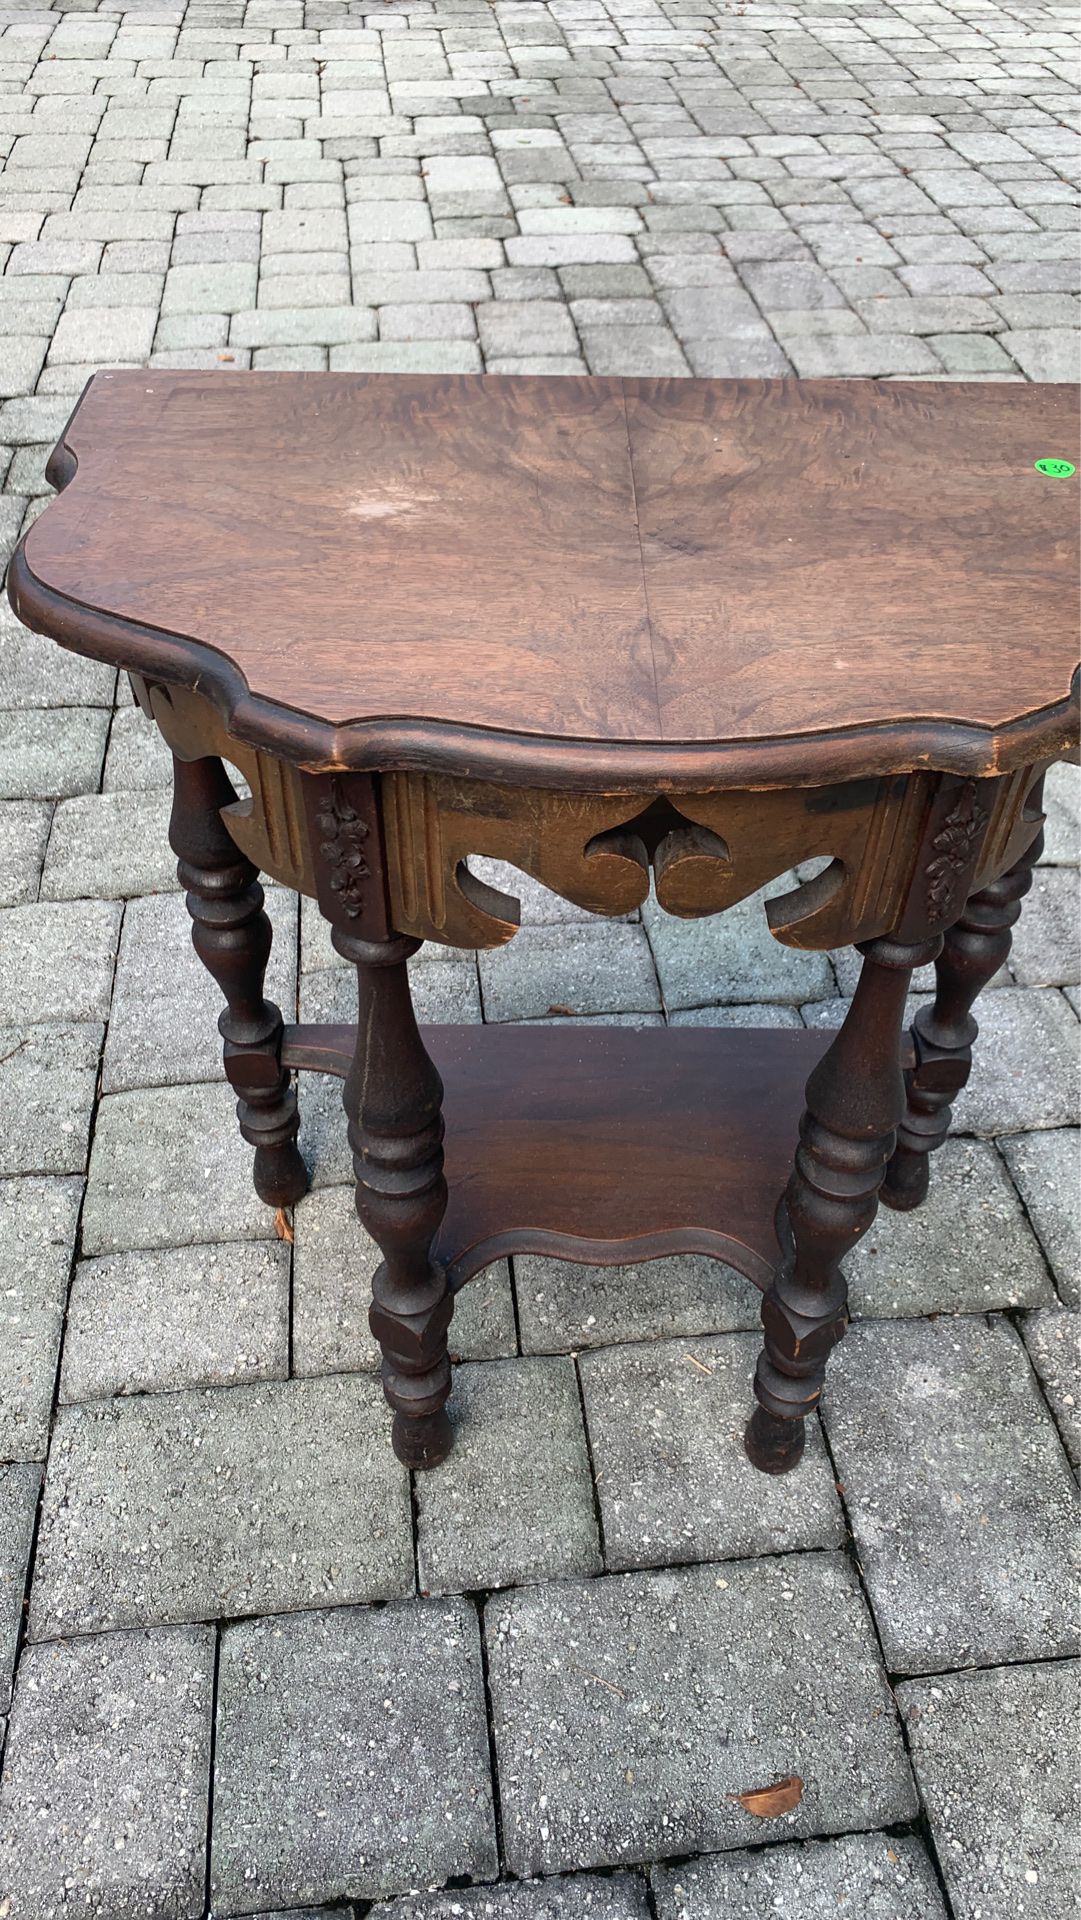 Small antique wood table